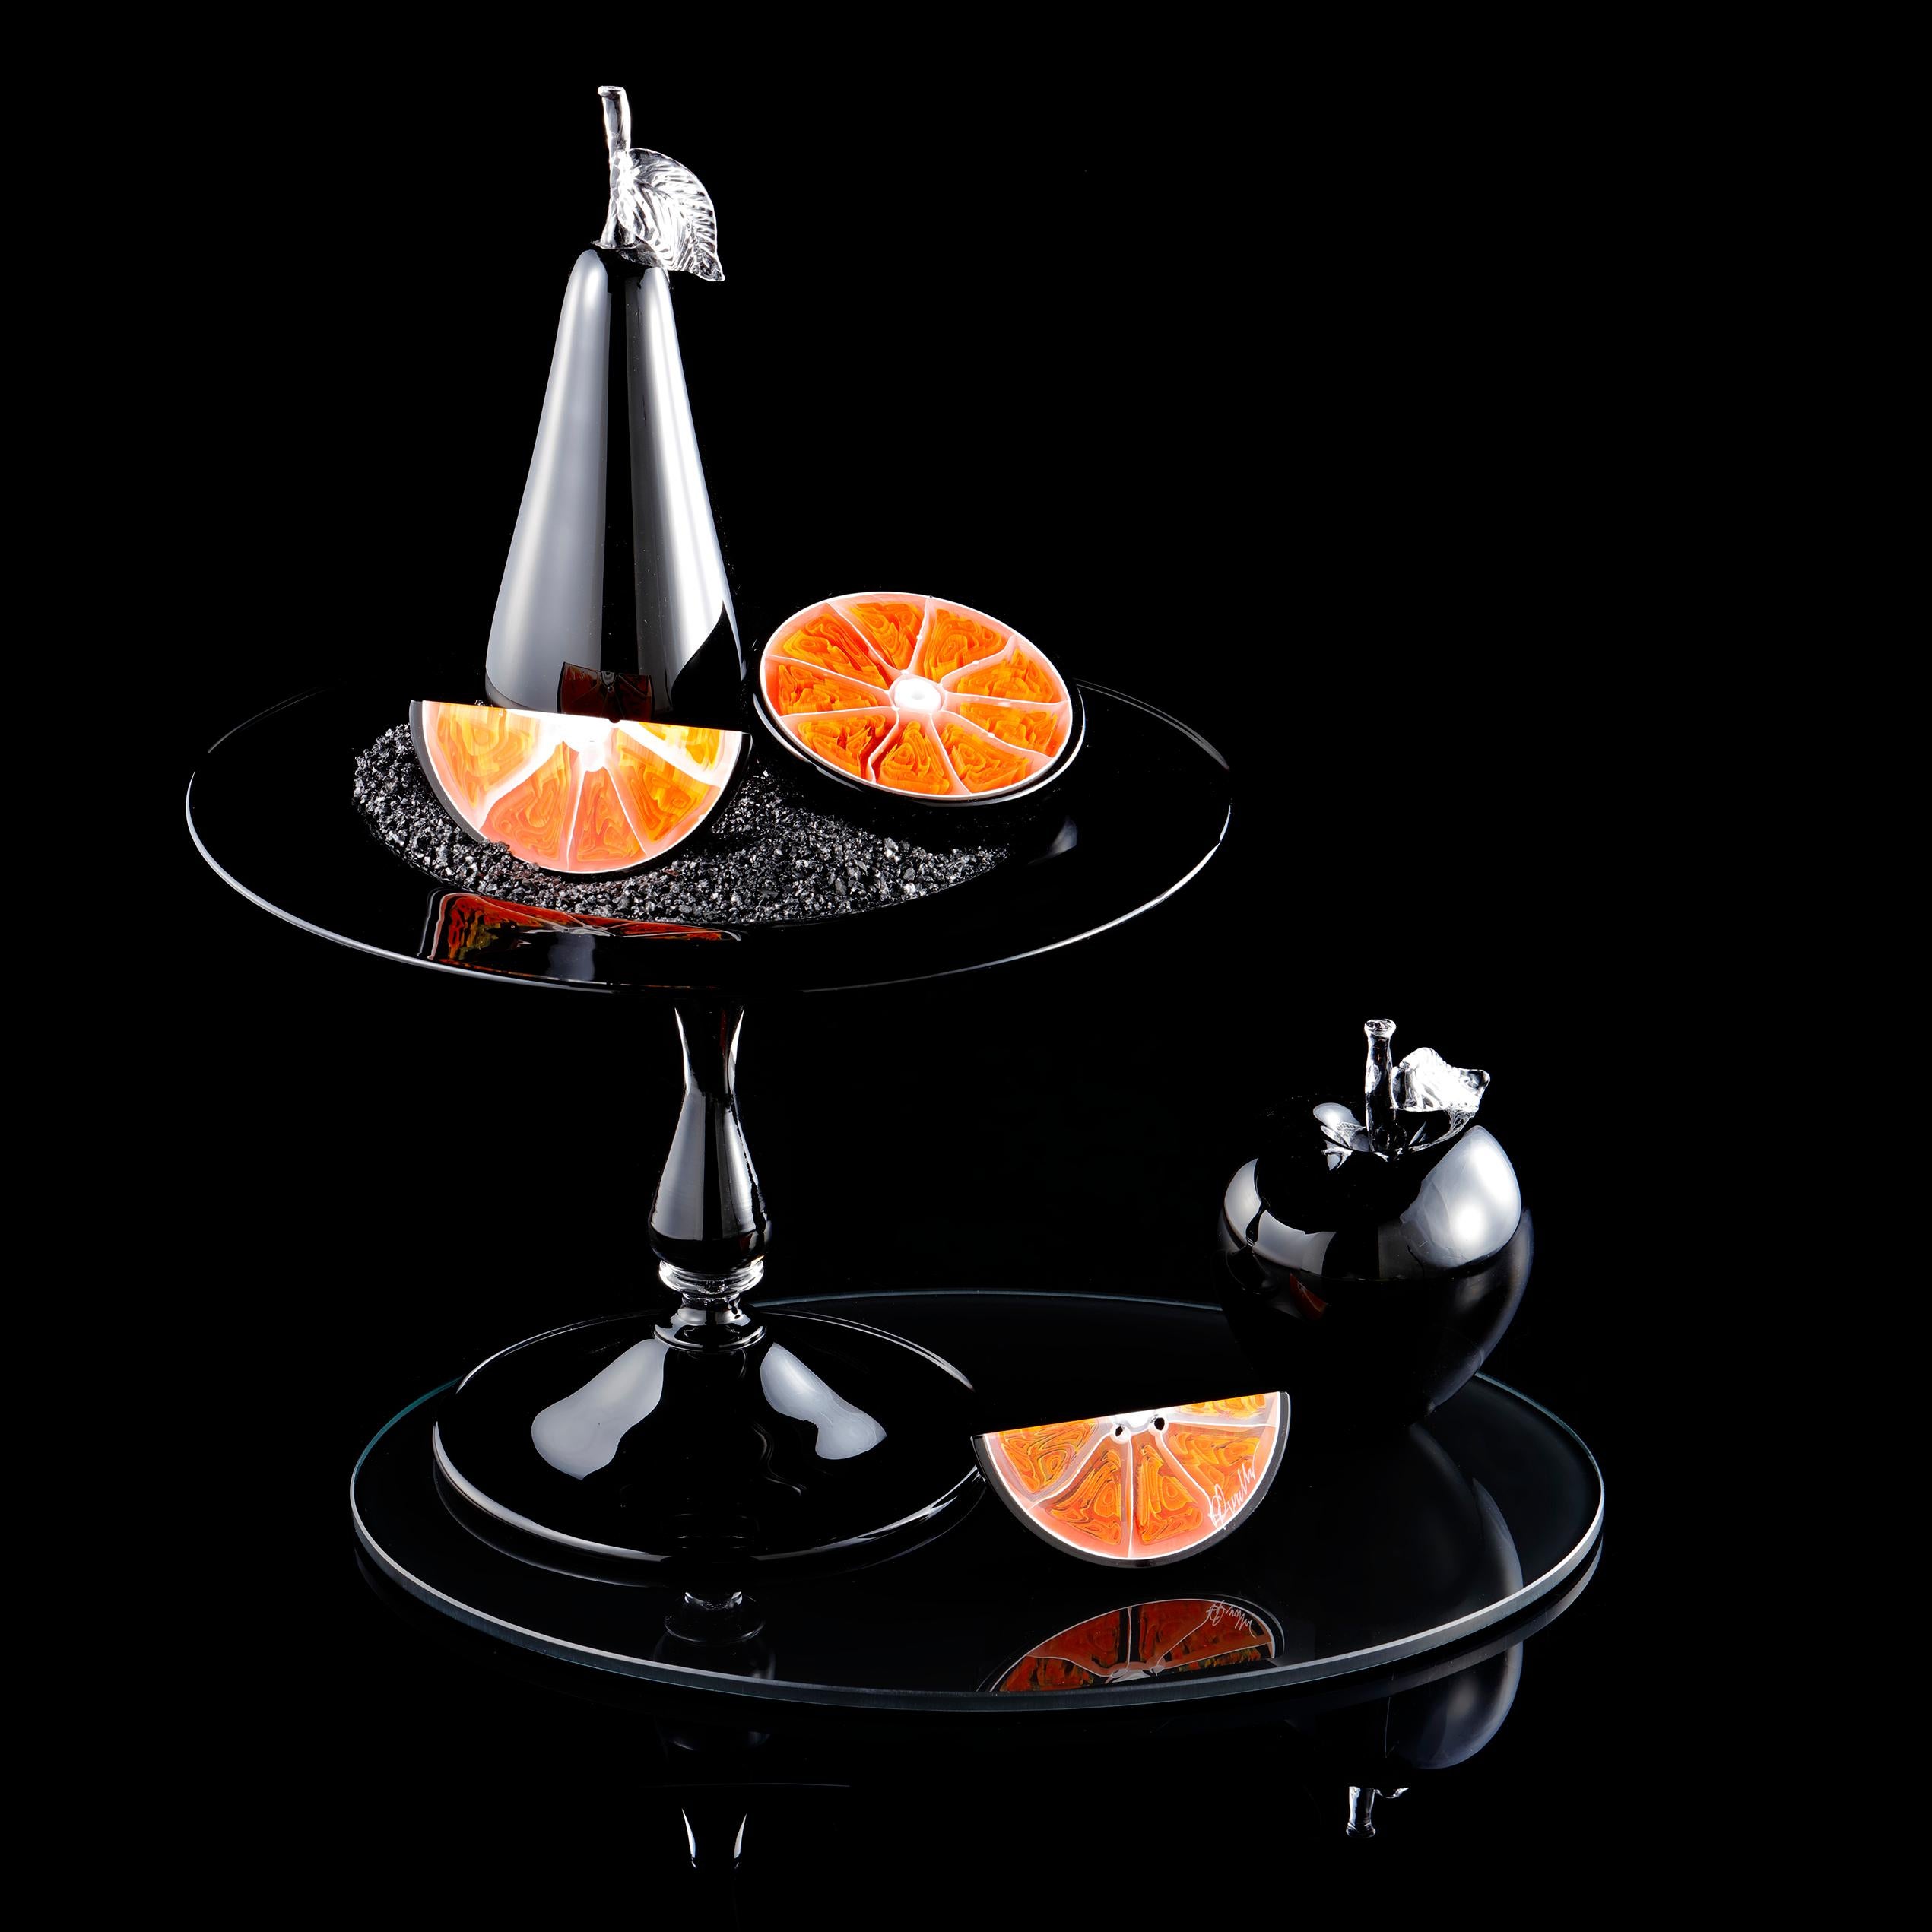 Carbon Orange is one of the British artist Elliot Walker's ongoing body of unique still life artworks. These compositions have the poise of classical paintings. Symbols of domestic life are carefully balanced with the transient. Luscious exotic